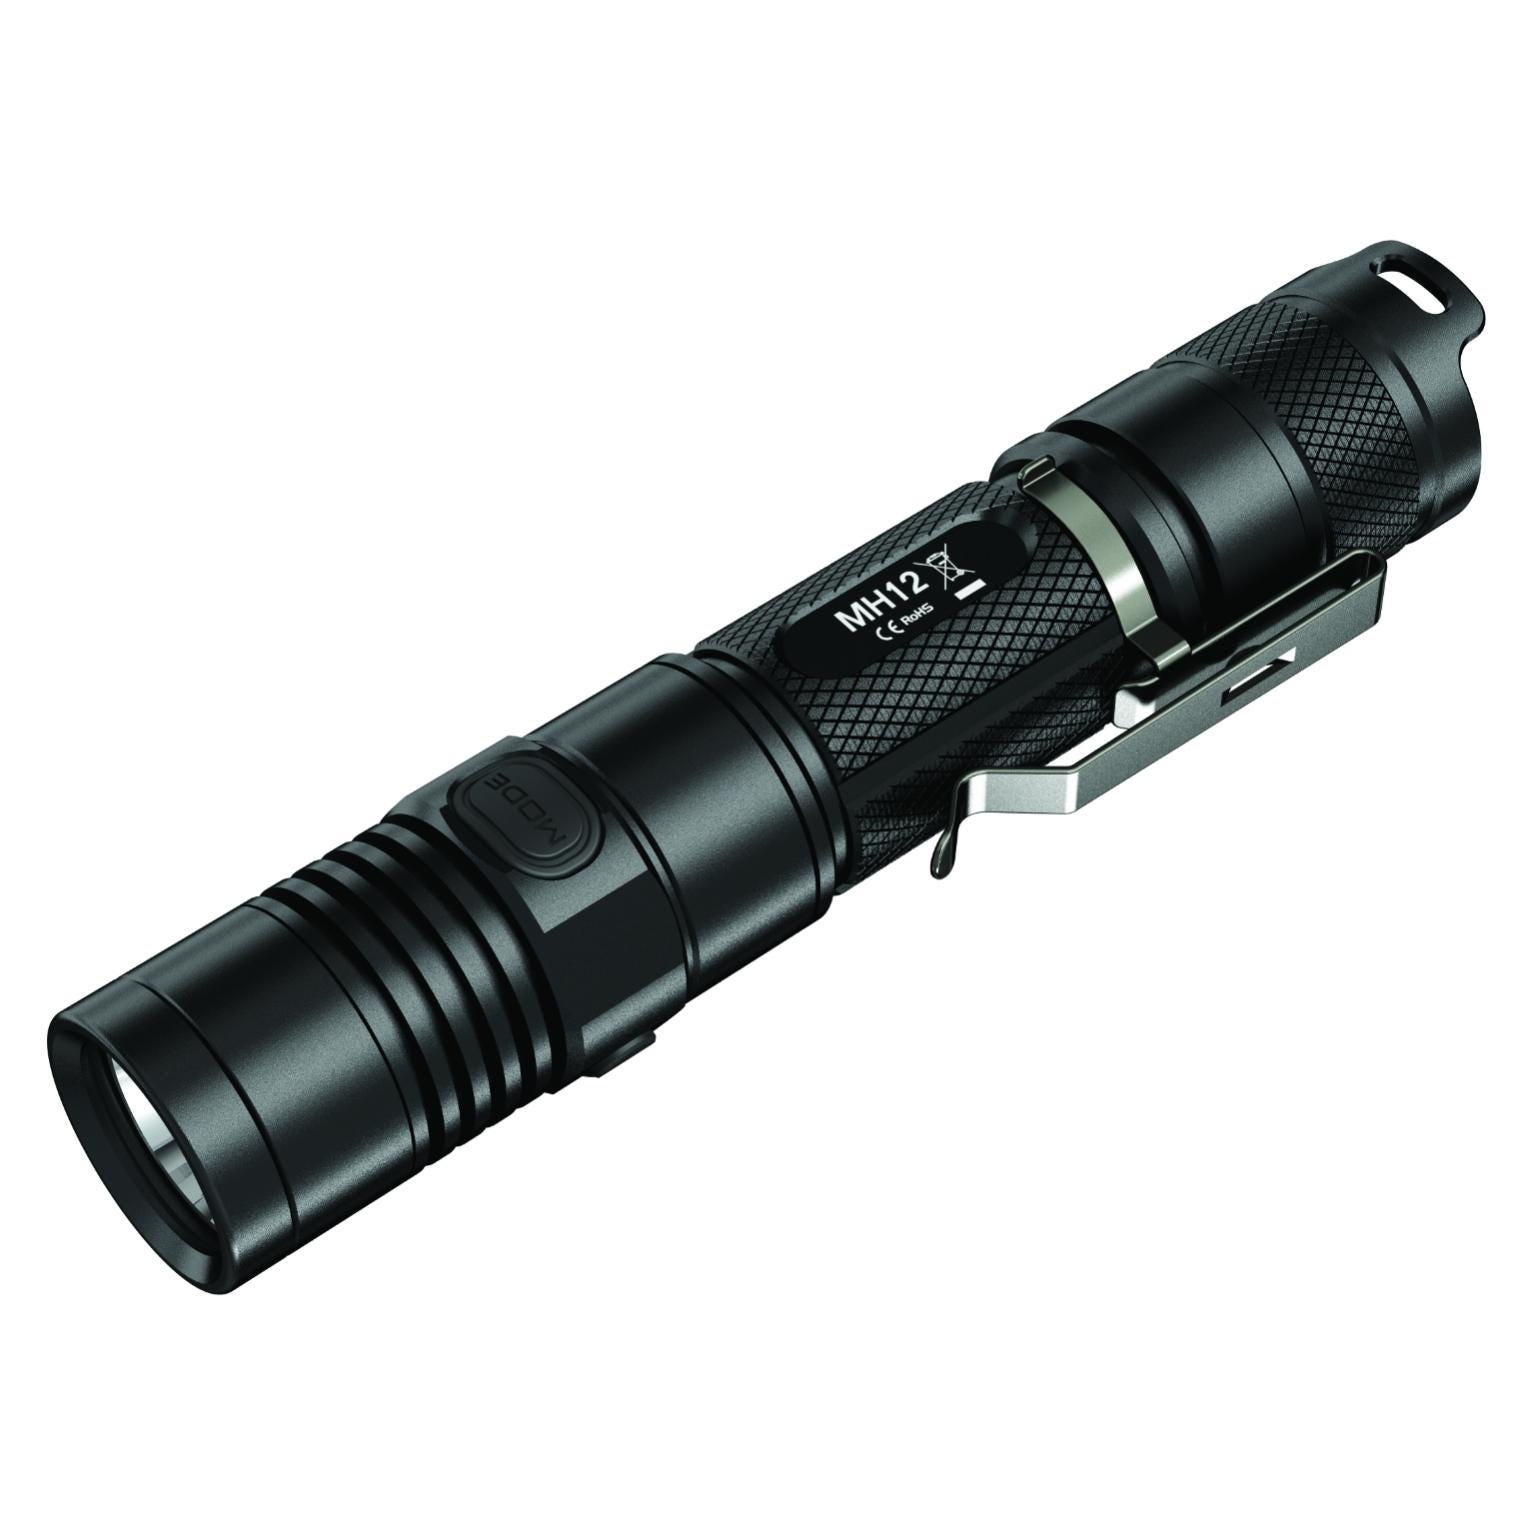 Lampe torche LED rechargeable Hybrid mh12, 1000 Lm NITECORE